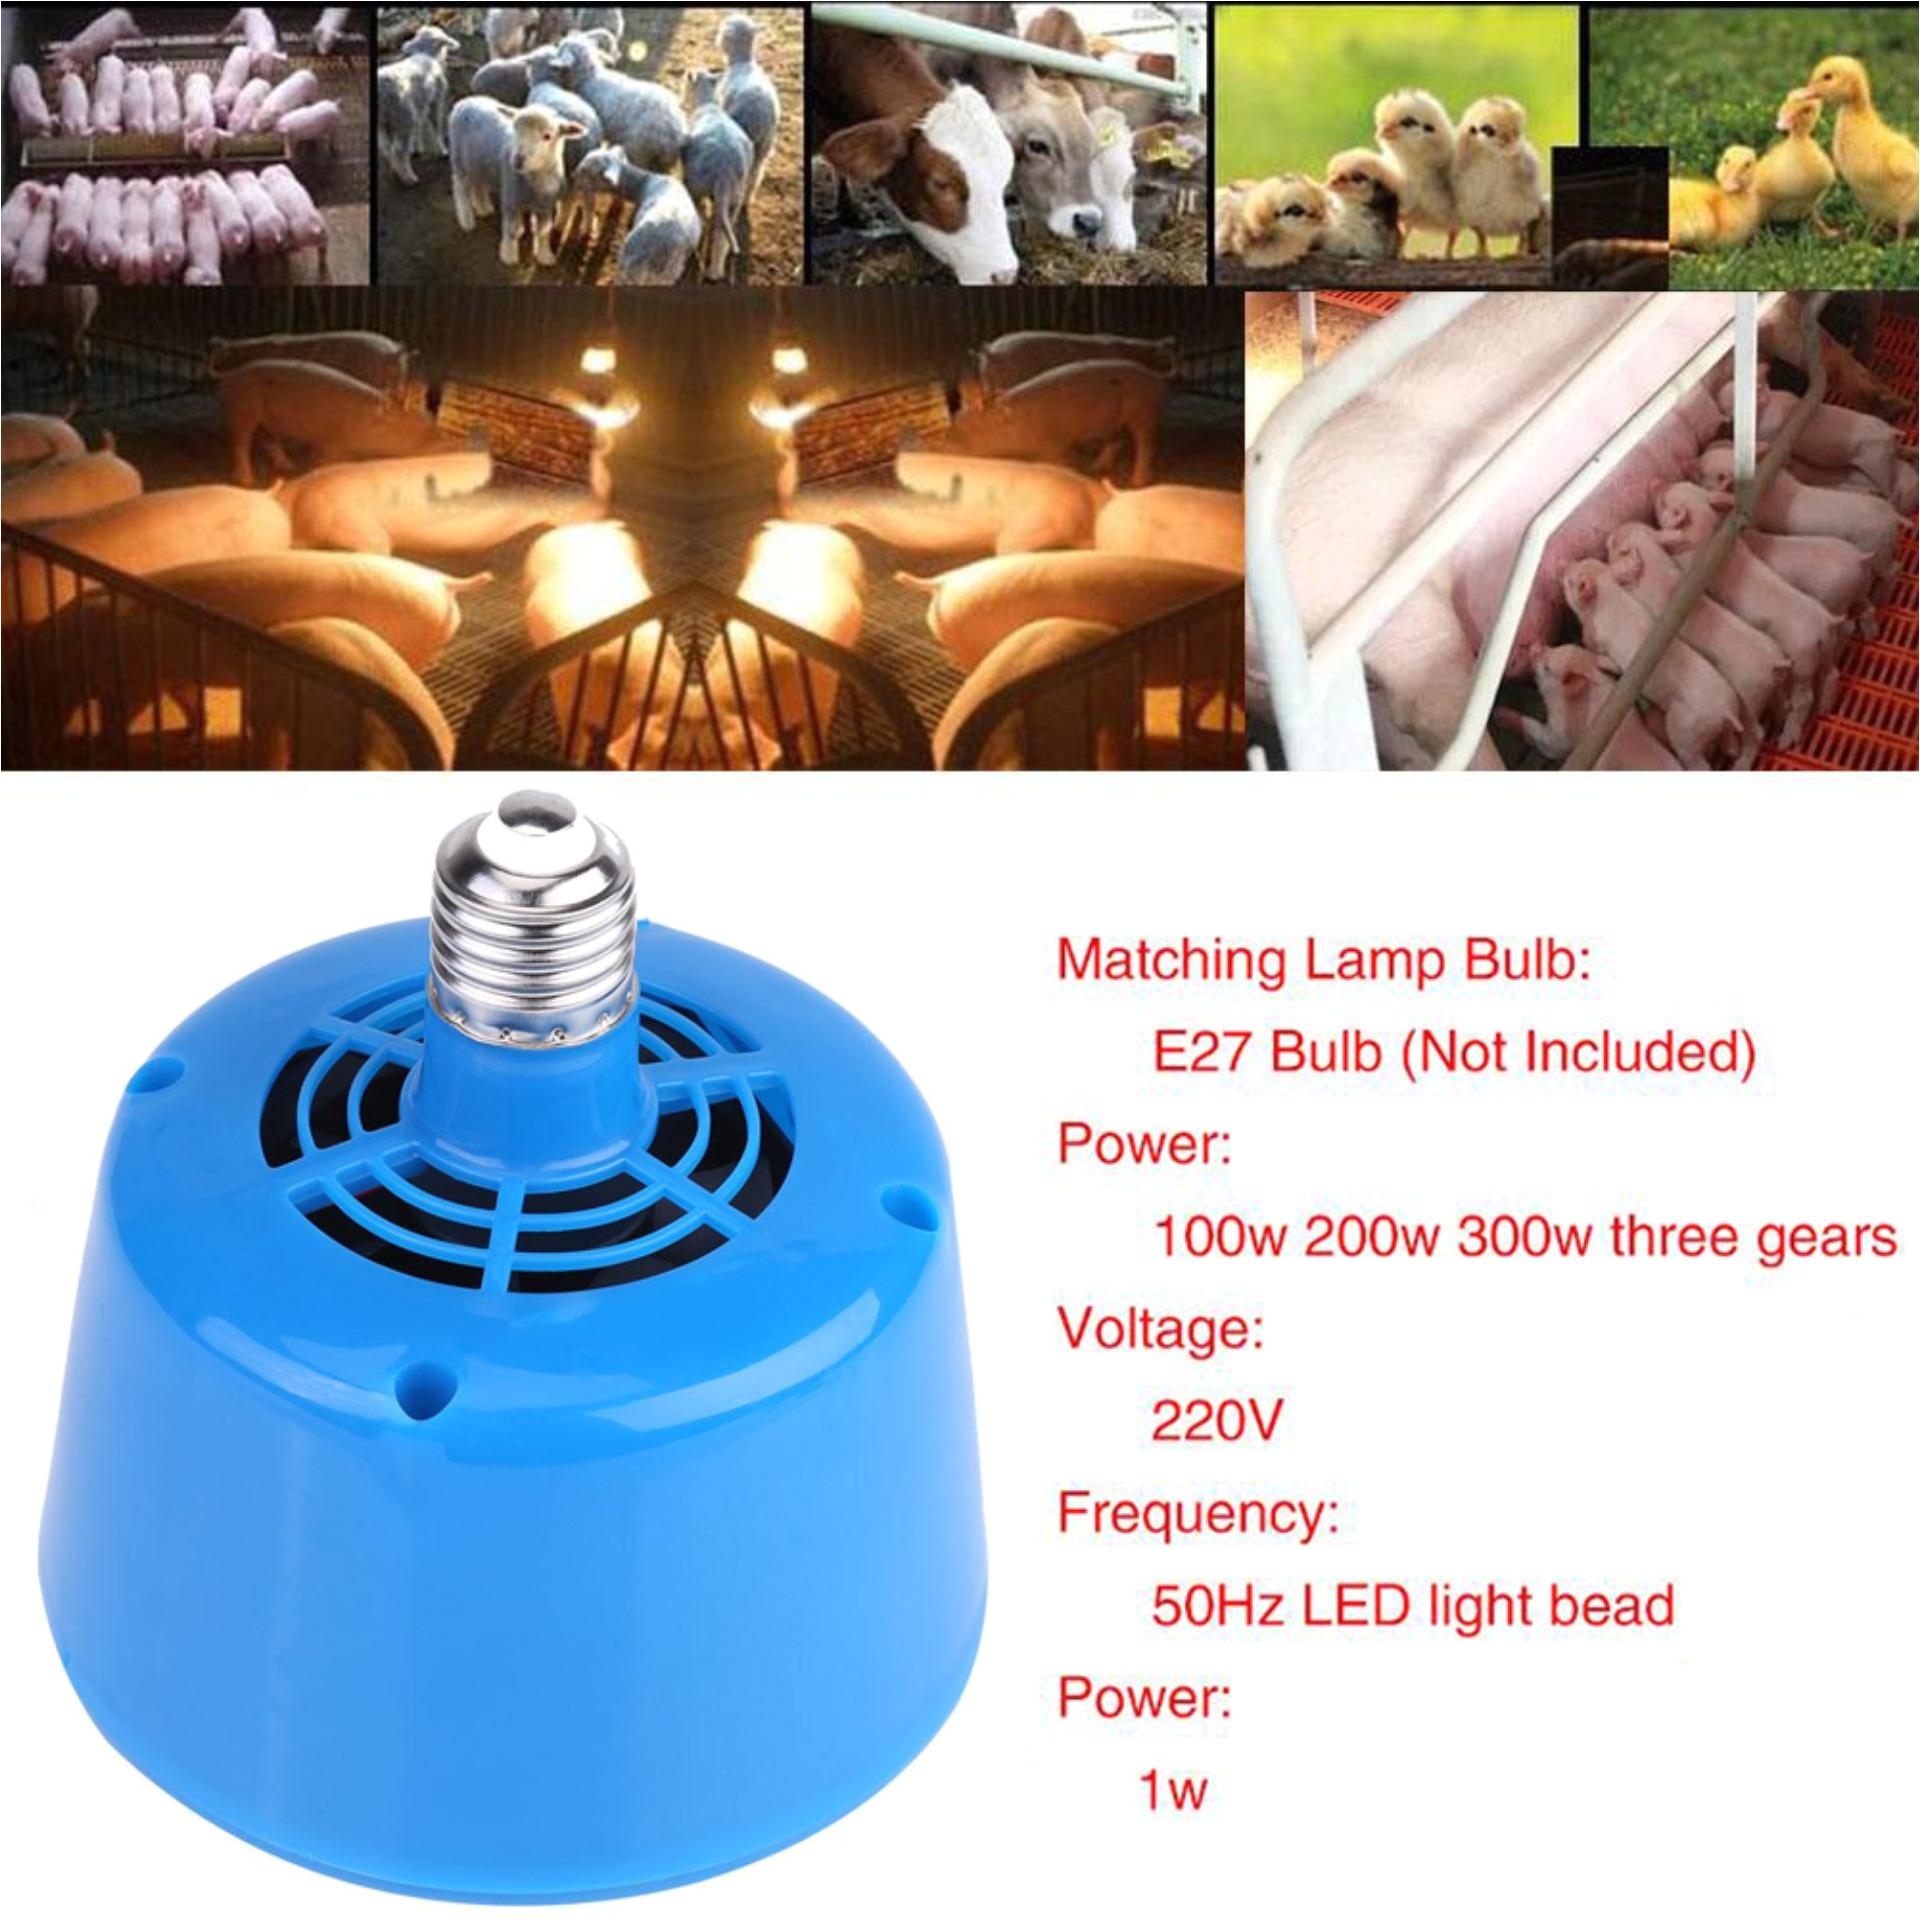 Best Heat Lamp for Dog House Reptile Heating for Sale Lighting for Pet Reptiles Online Brands